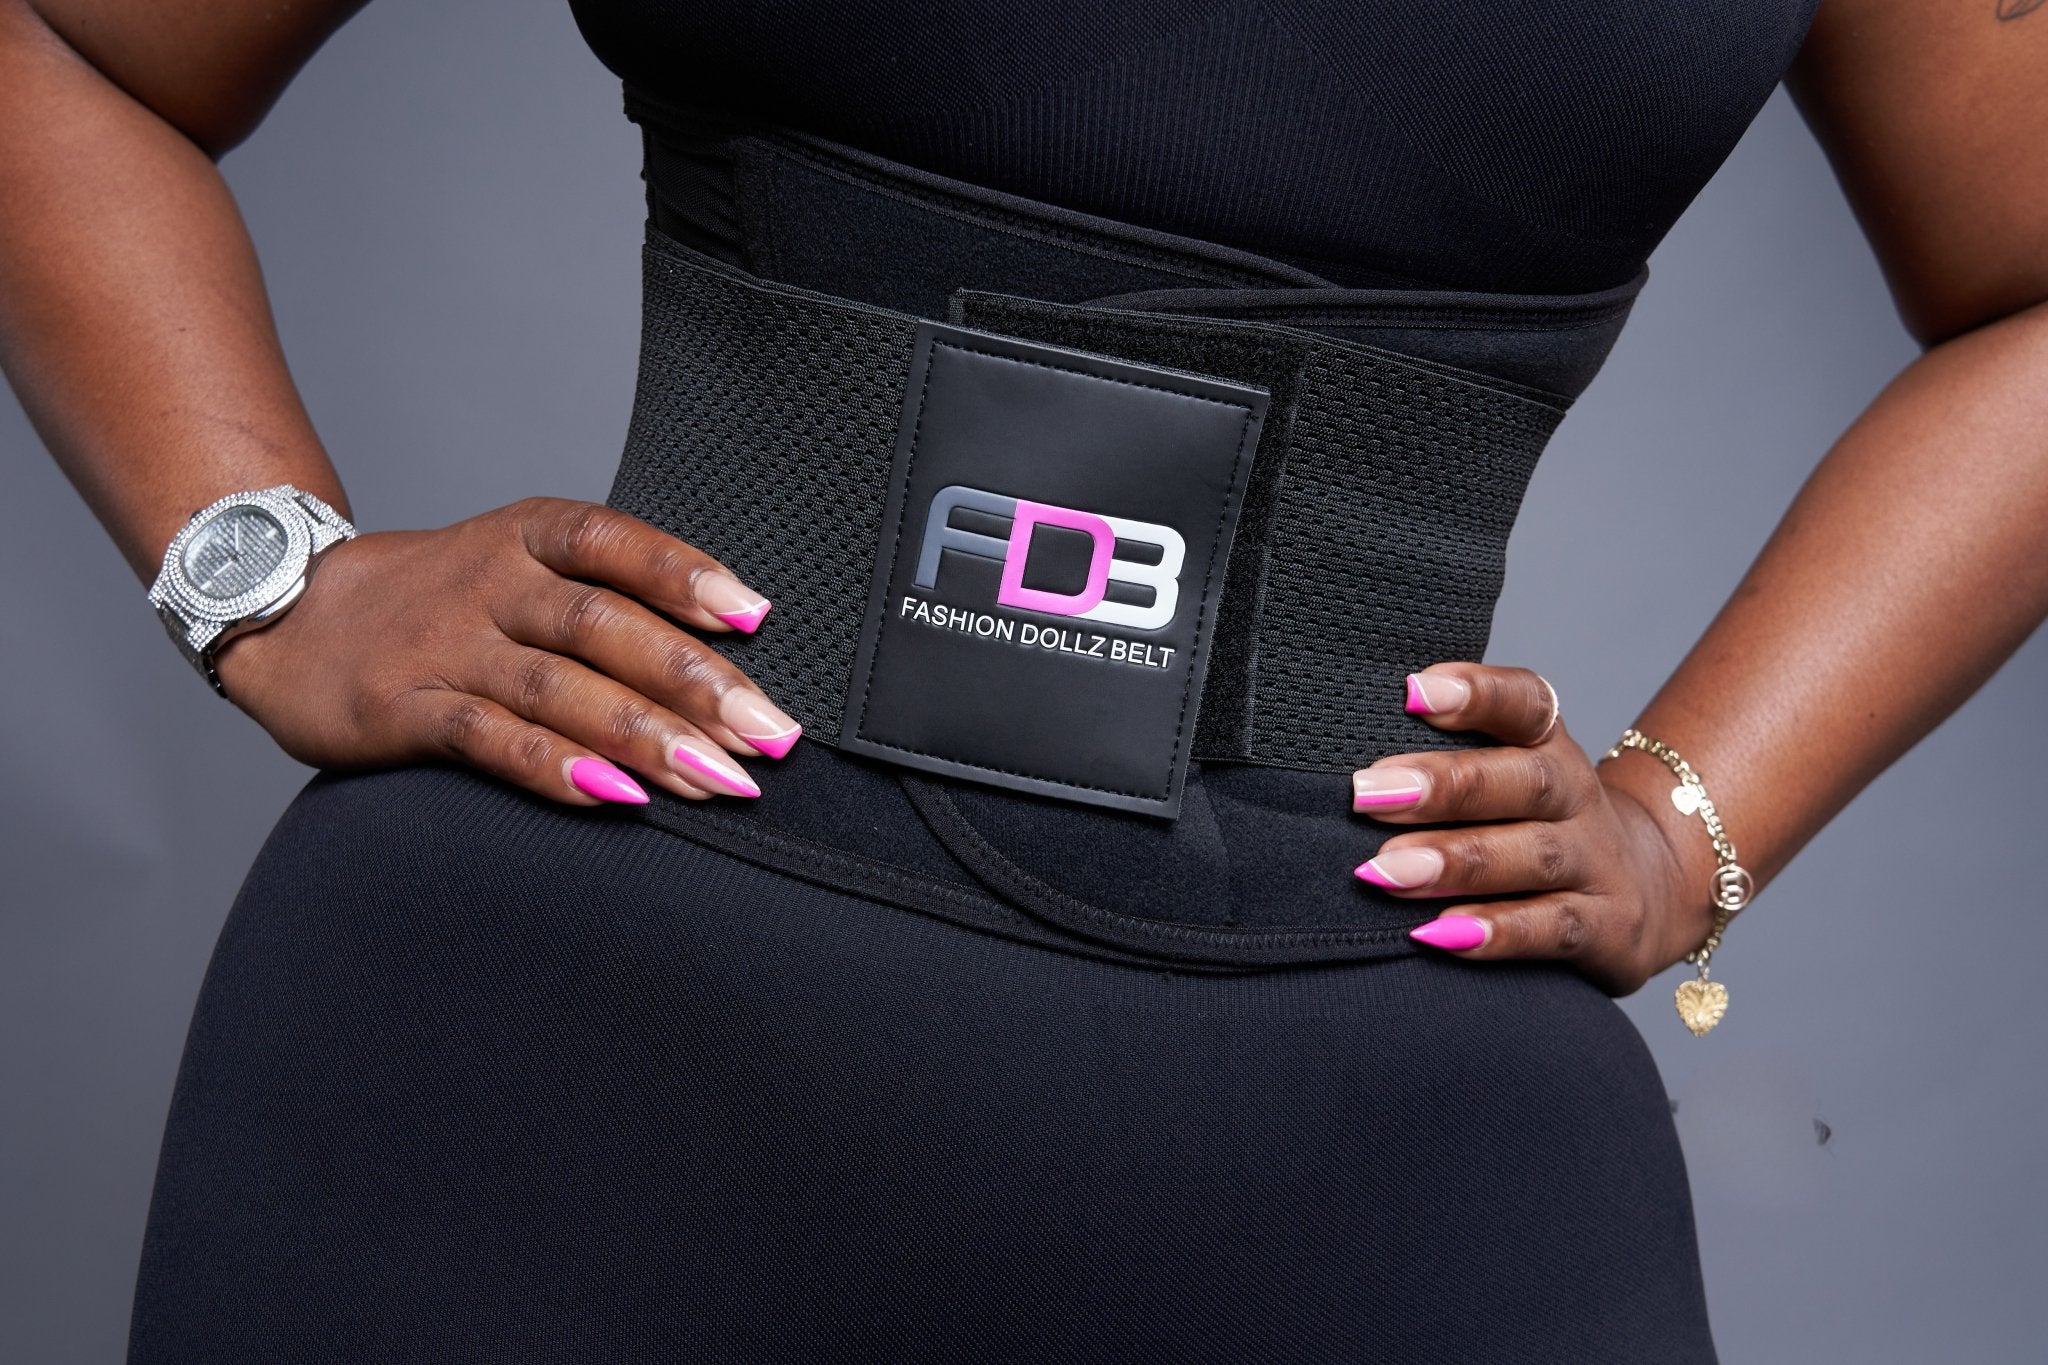 Deluxe Extreme waist trainer